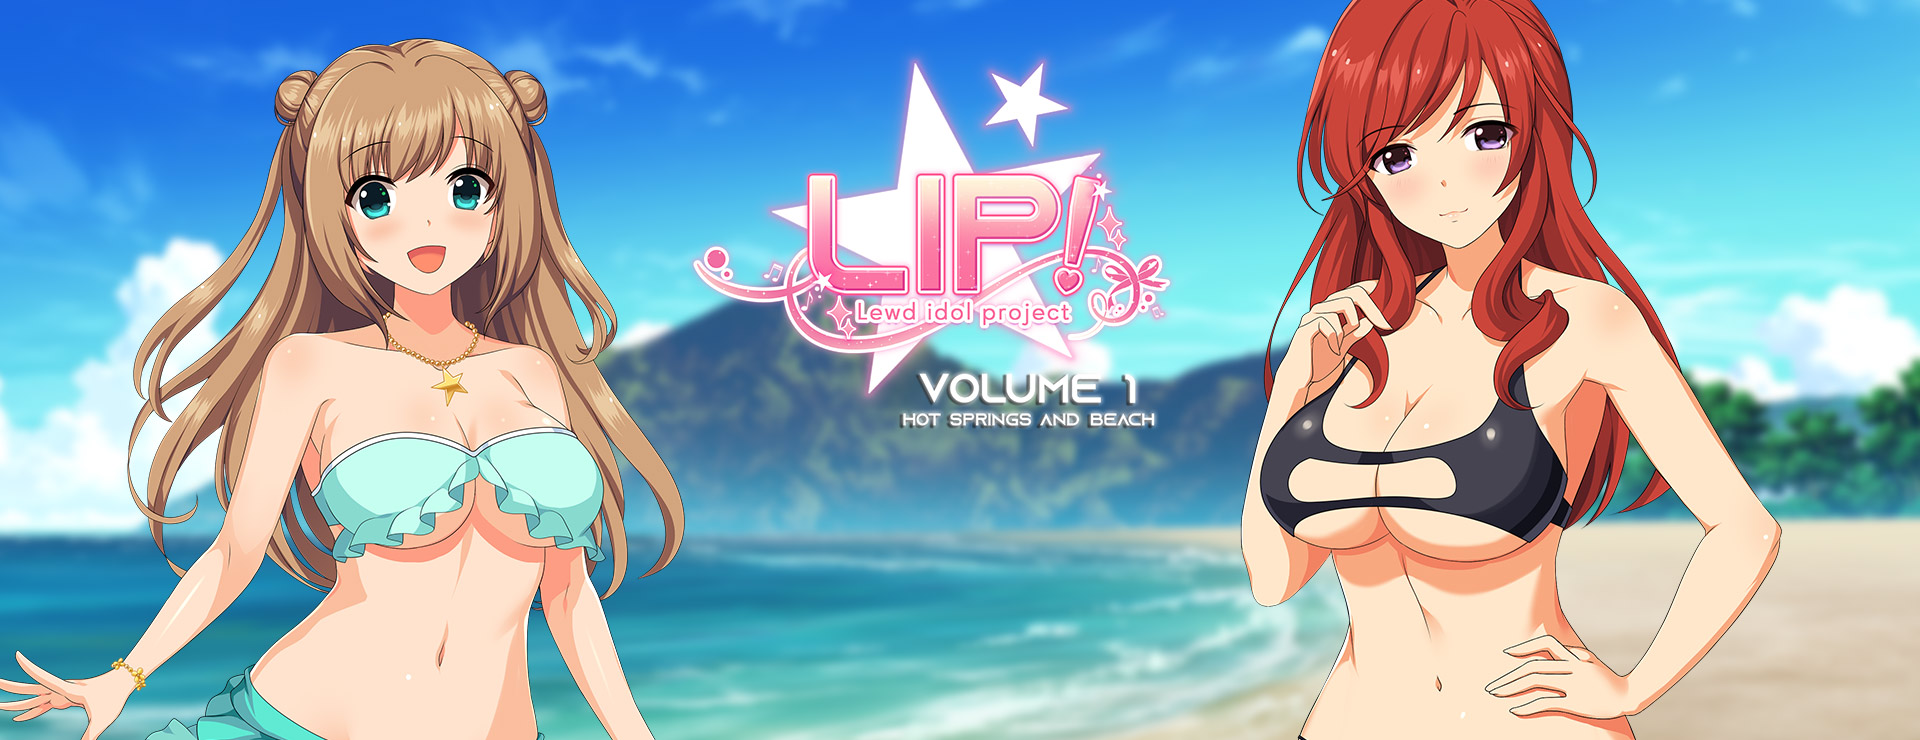 LIP! Lewd Idol Project Vol. 1 - Hot Springs and Beach Episodes - 虚拟小说 遊戲